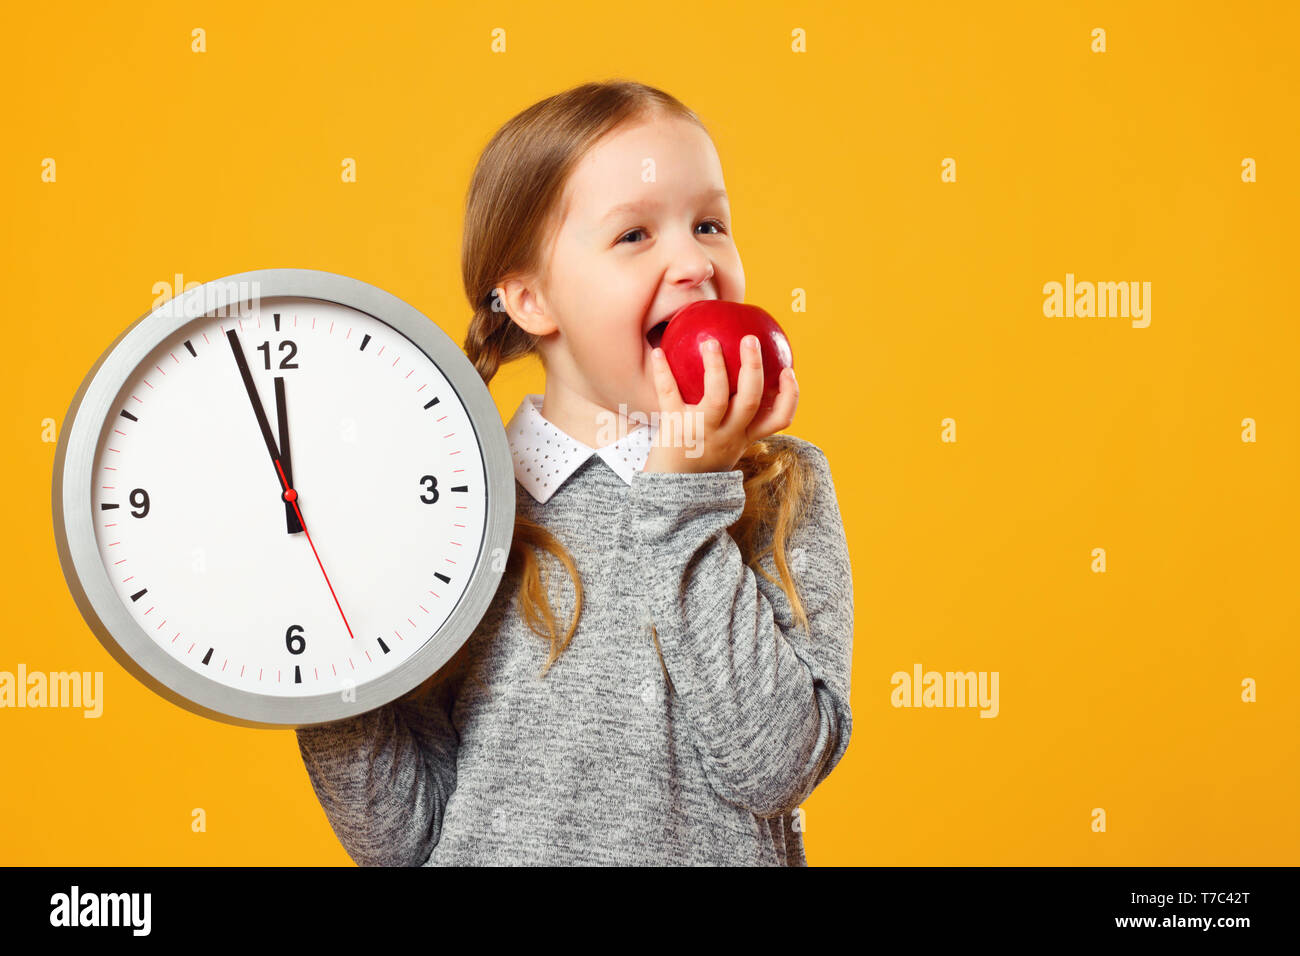 Little girl schoolgirl holds a big clock and bites a red apple on a yellow background. Break and lunch. Stock Photo